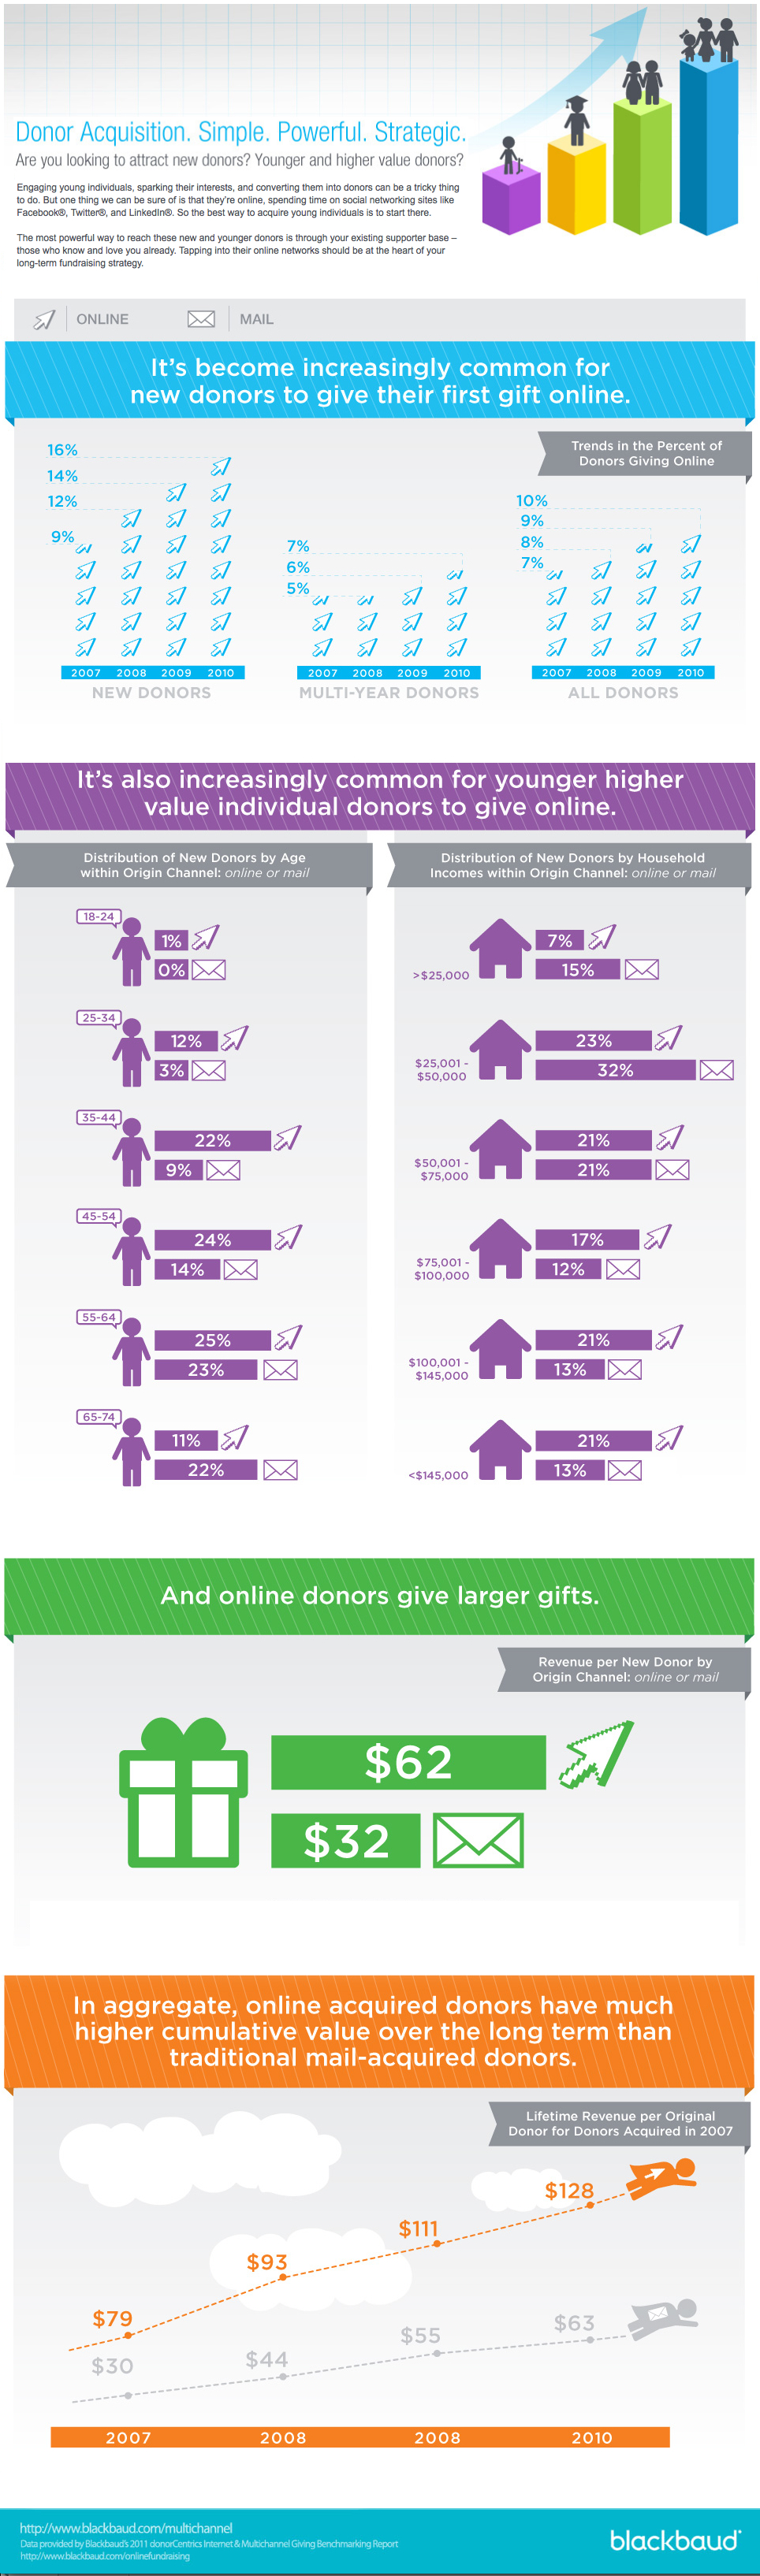 Donor Acquisition Through Online Sources is Key